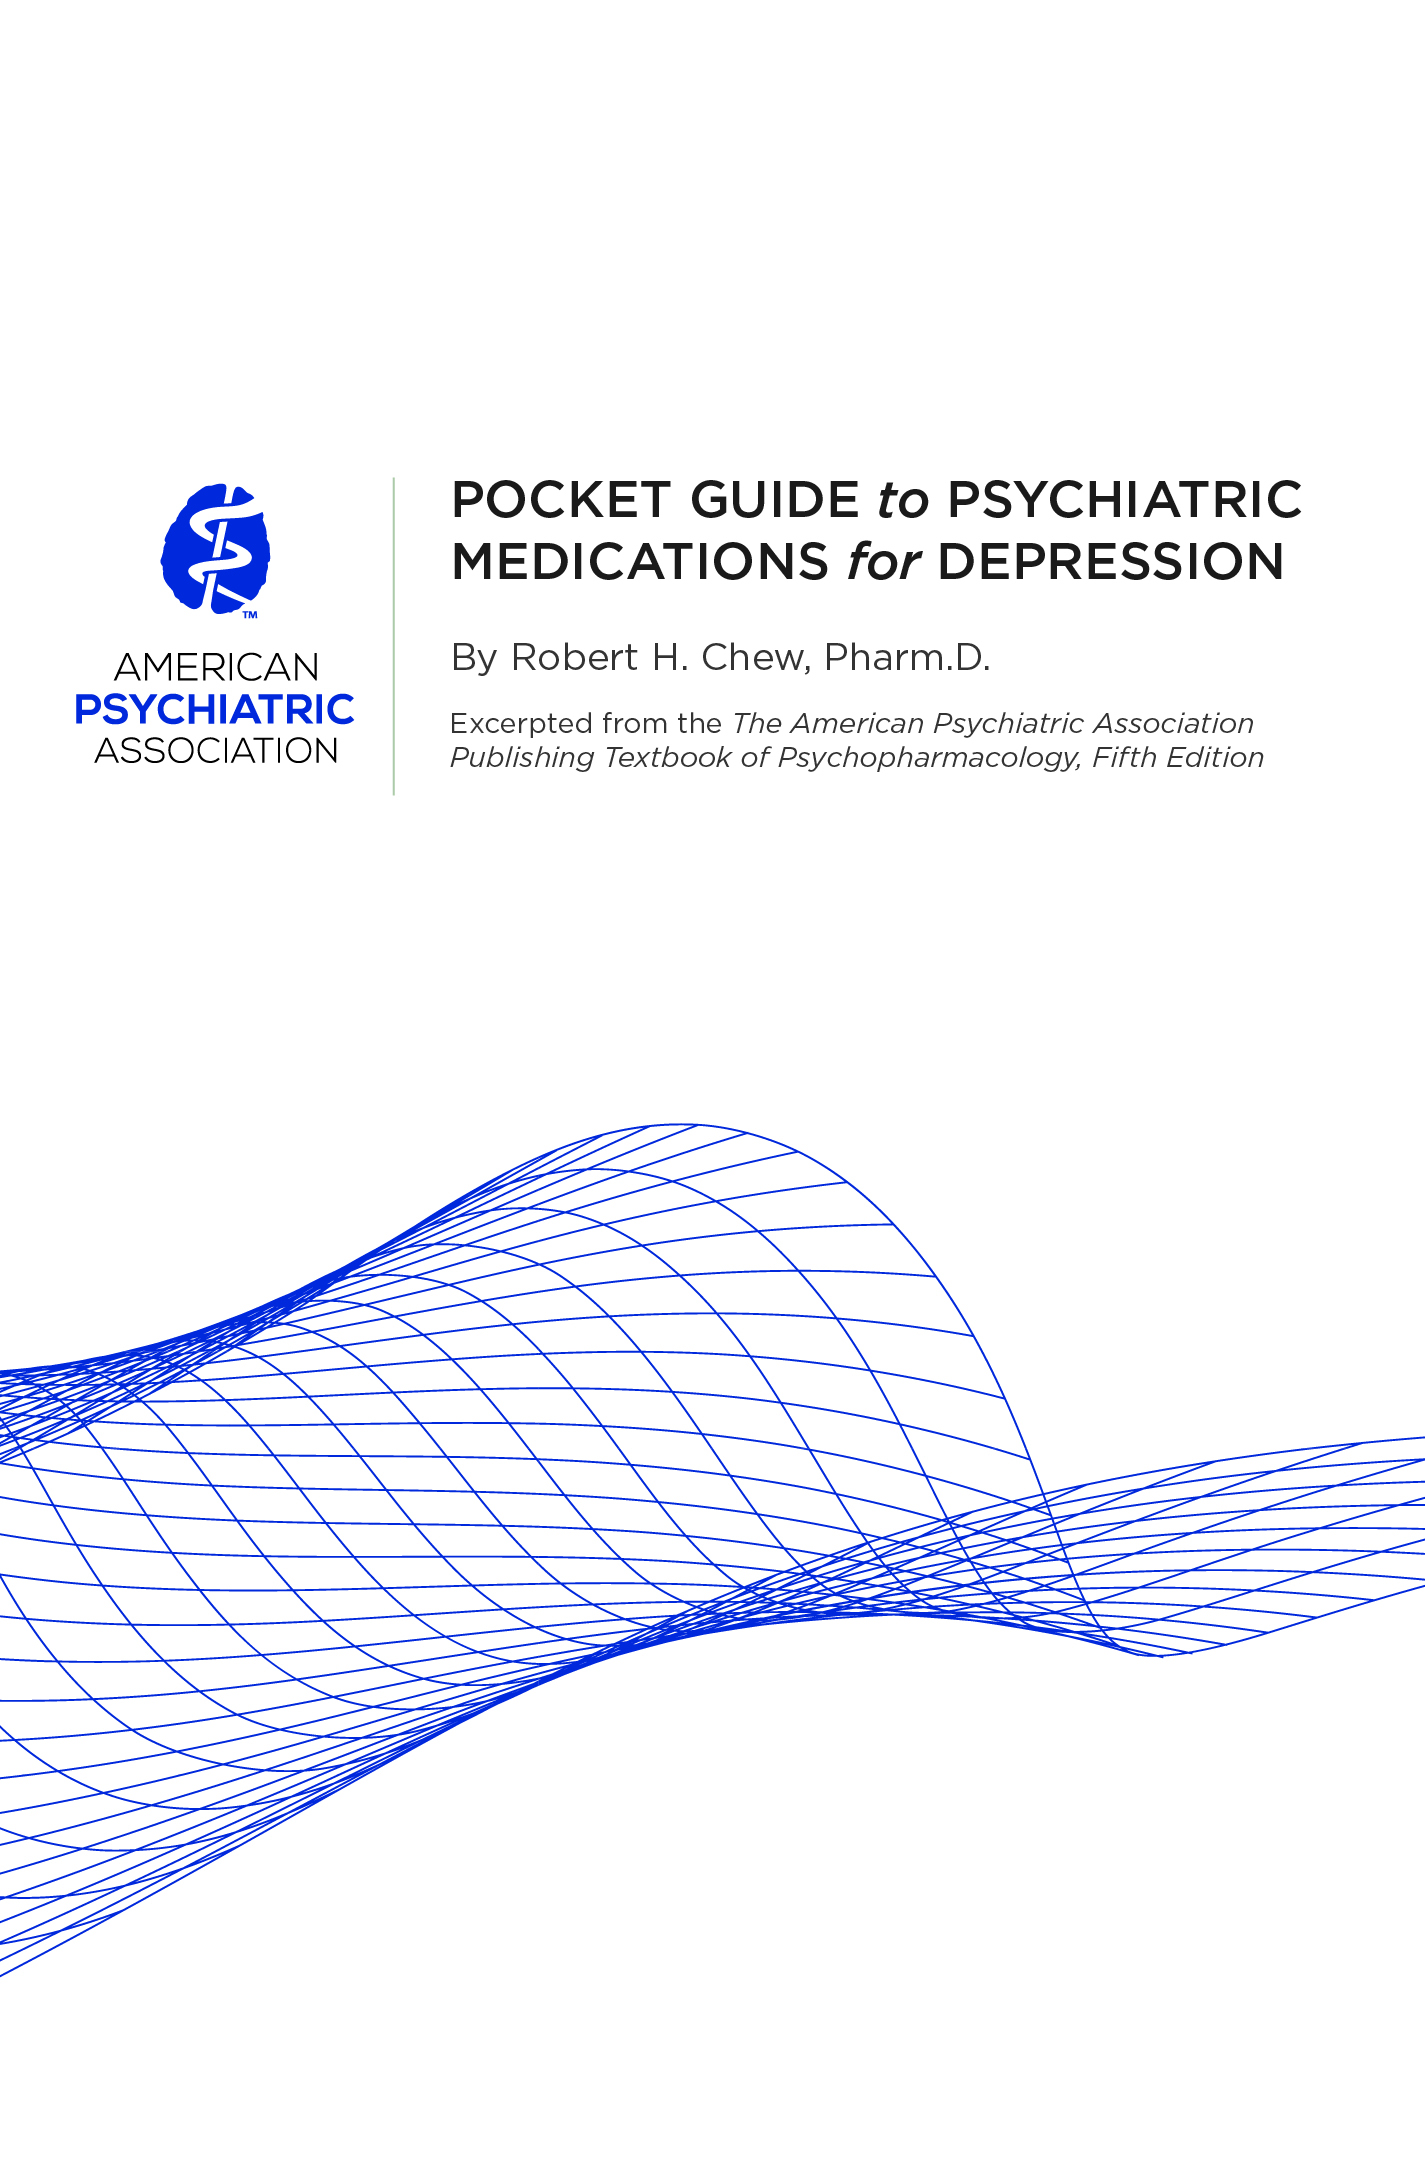 Pocket Guide to Psychiatric Medications for Depression product page